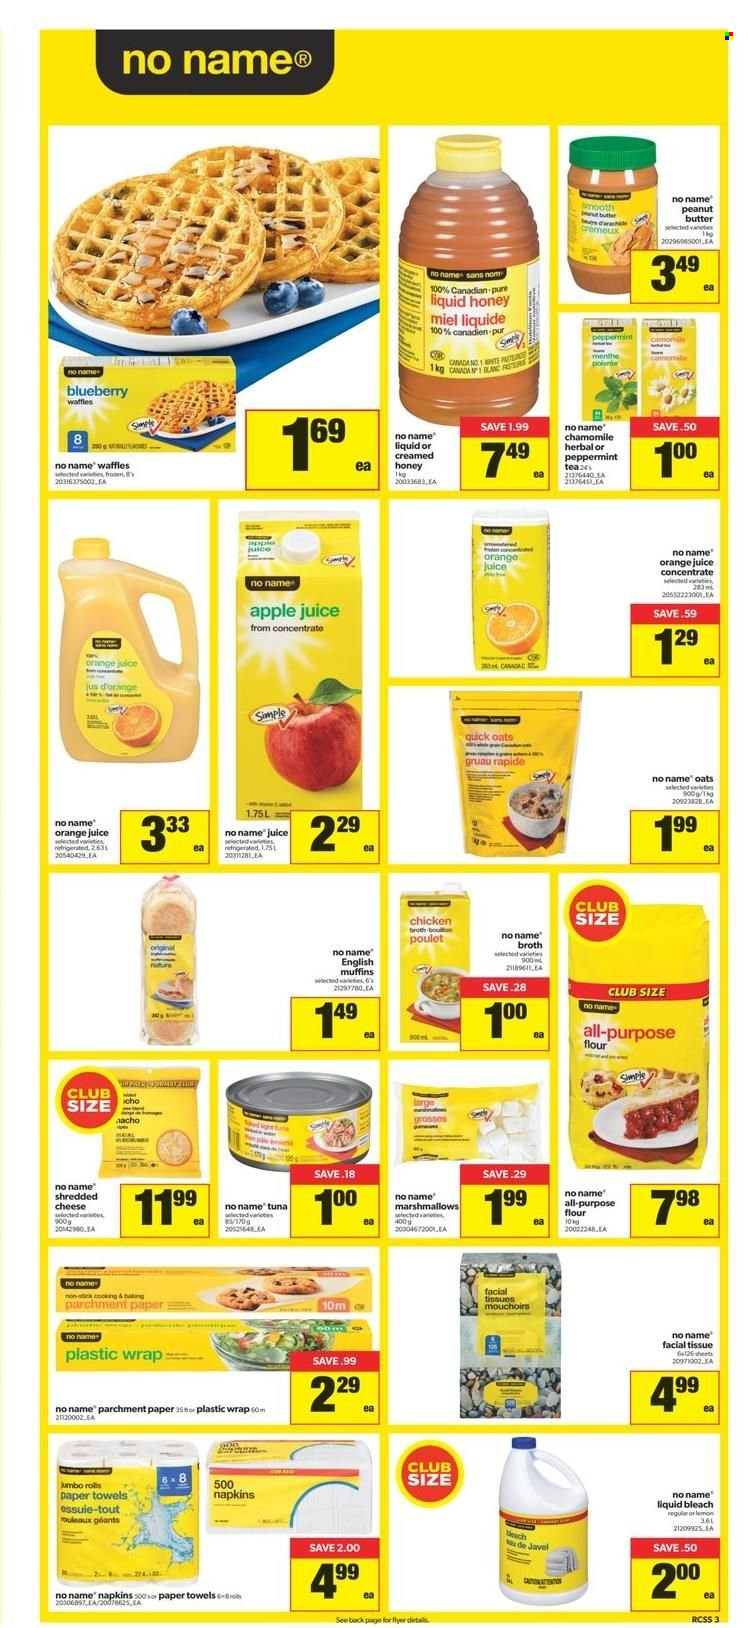 thumbnail - Real Canadian Superstore Flyer - December 30, 2021 - January 05, 2022 - Sales products - english muffins, waffles, tuna, No Name, shredded cheese, marshmallows, flour, chicken broth, oats, broth, Quick Oats, honey, peanut butter, apple juice, orange juice, juice, napkins, tissues, kitchen towels, paper towels, bleach. Page 3.